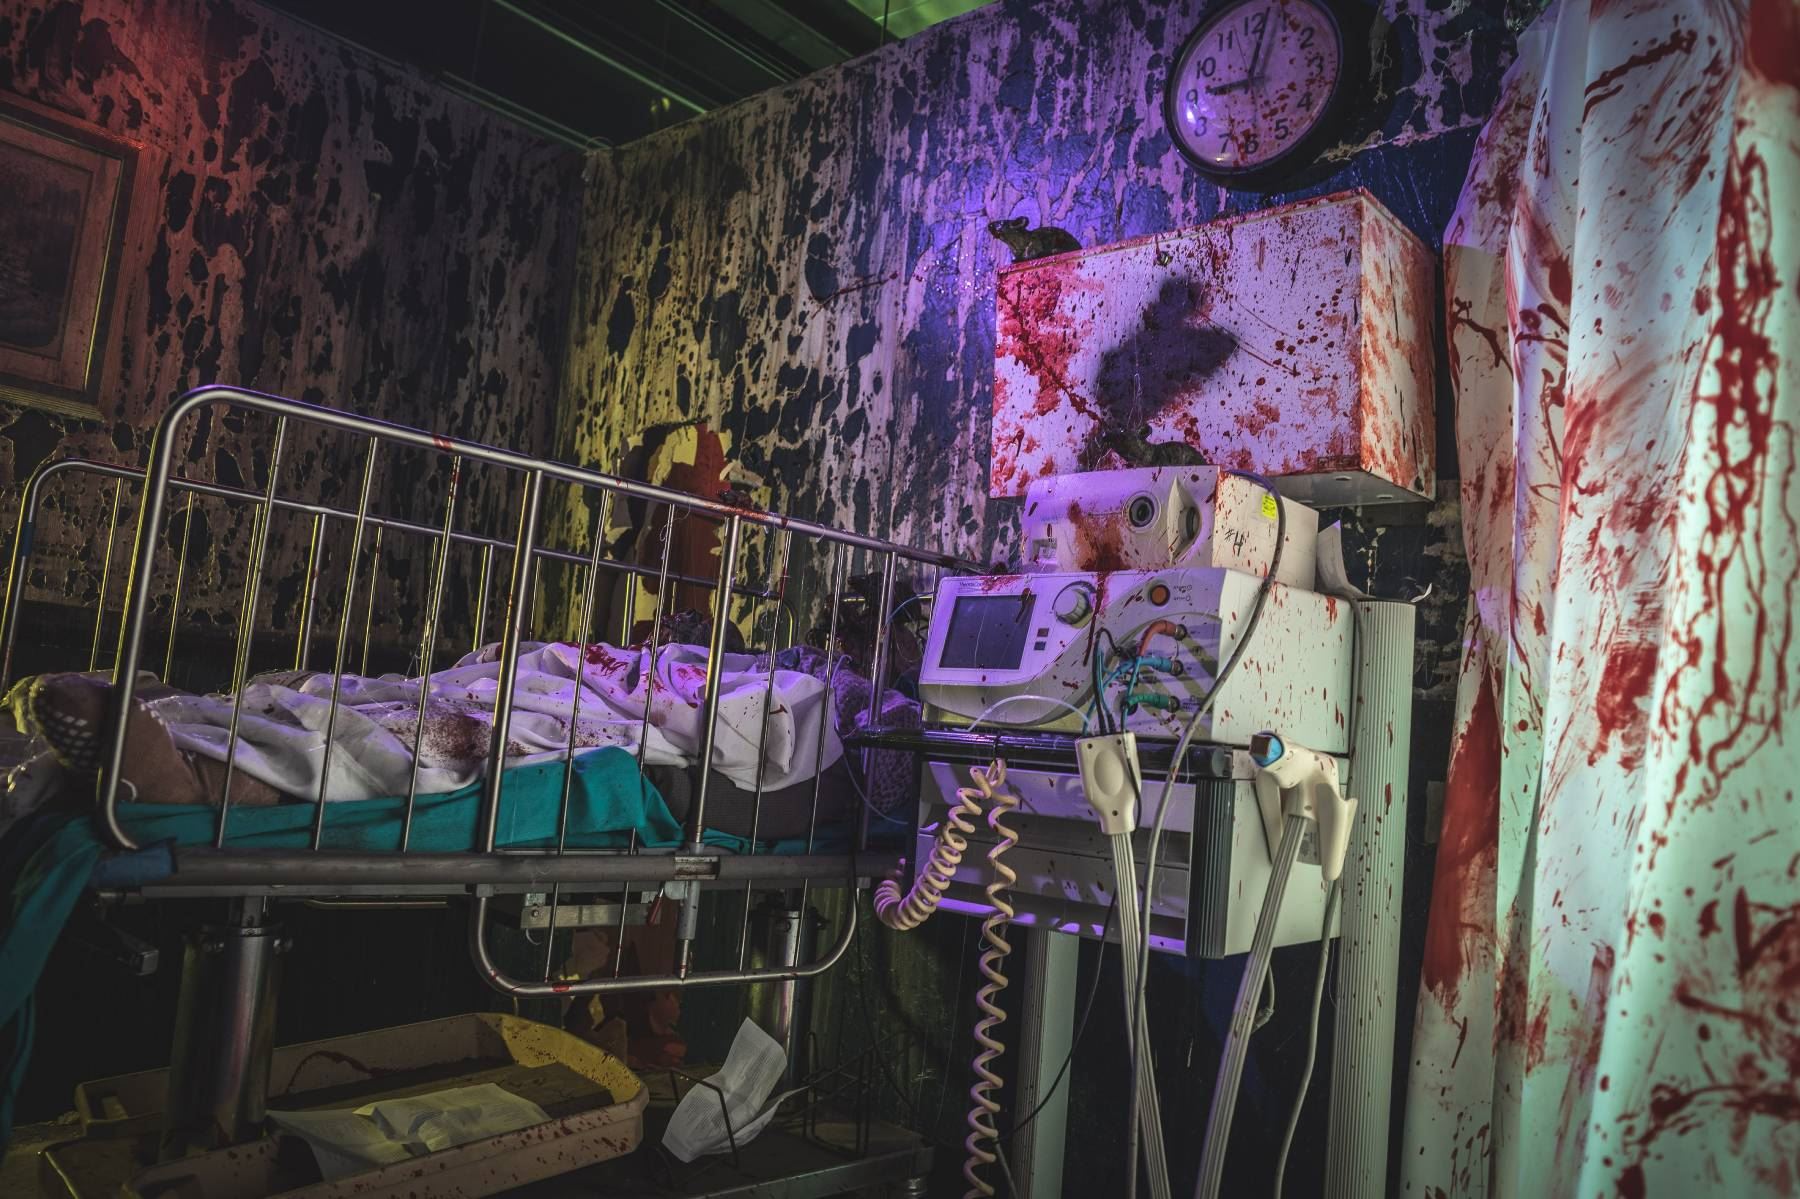 Nightmare’s Gate Haunted House Gallery